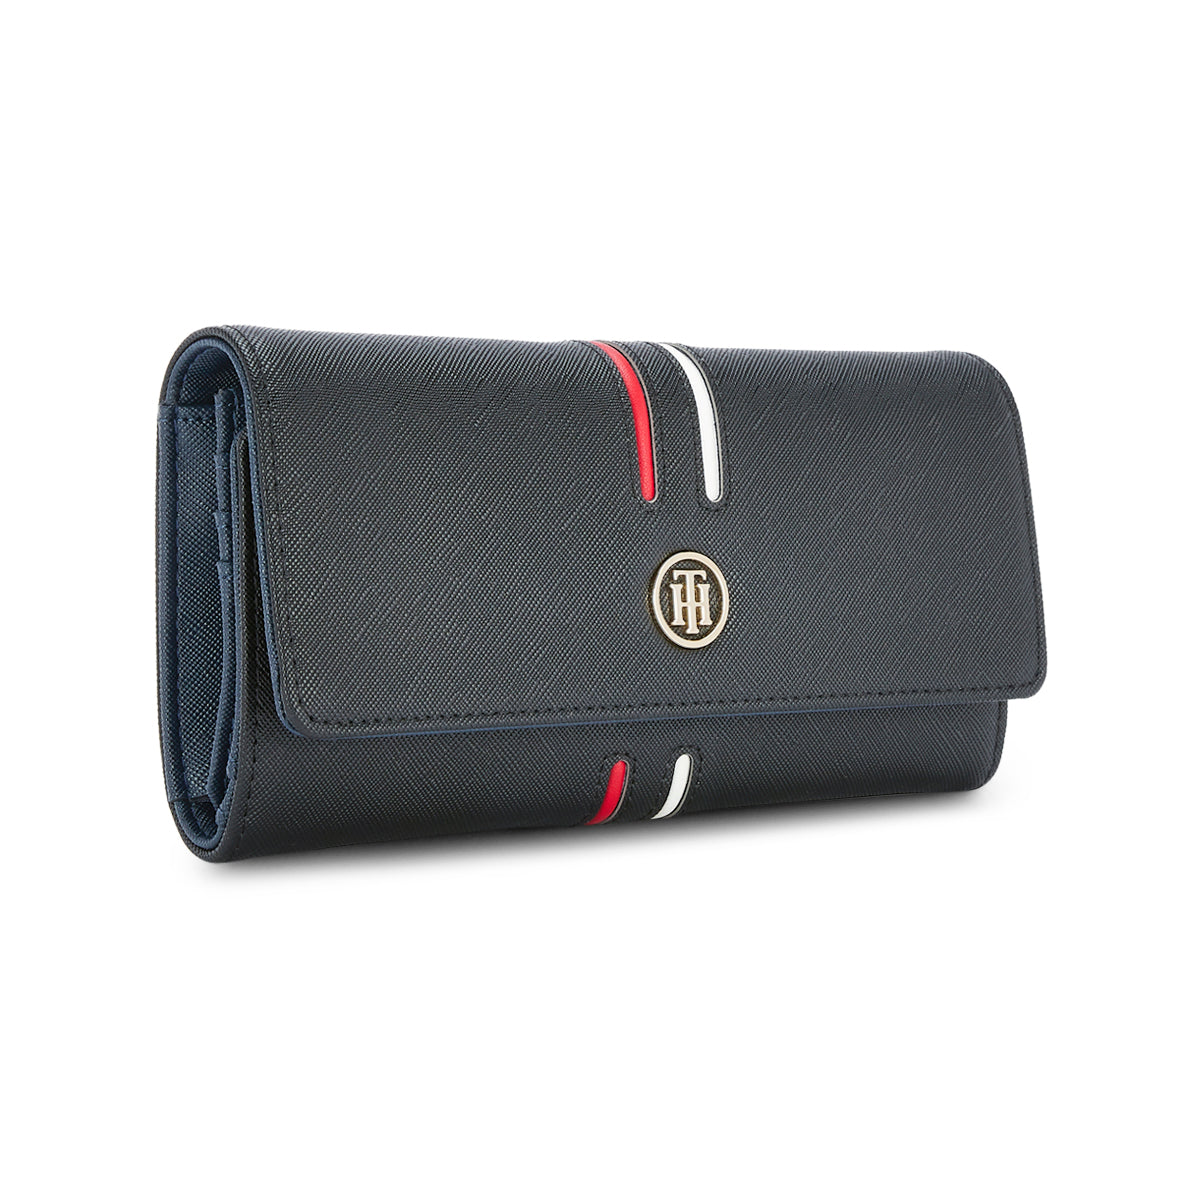 Tommy Hilfiger Moringa Womens Leather Wallet BlackTommy Hilfiger Moringa Womens Leather Wallet Black